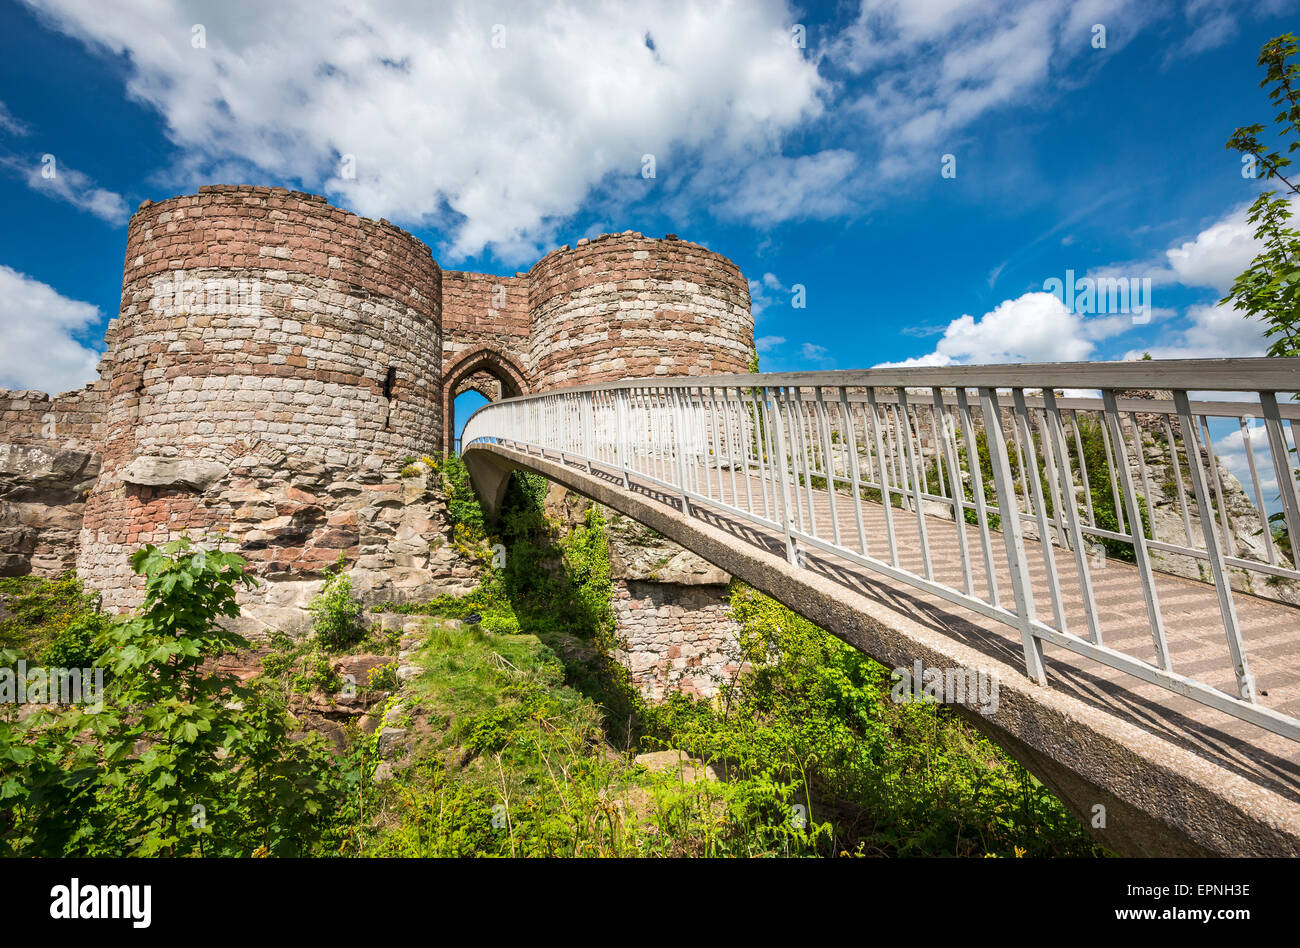 Bridge leading to the entrance of the inner ward at Beeston castle in Cheshire, England. Stock Photo